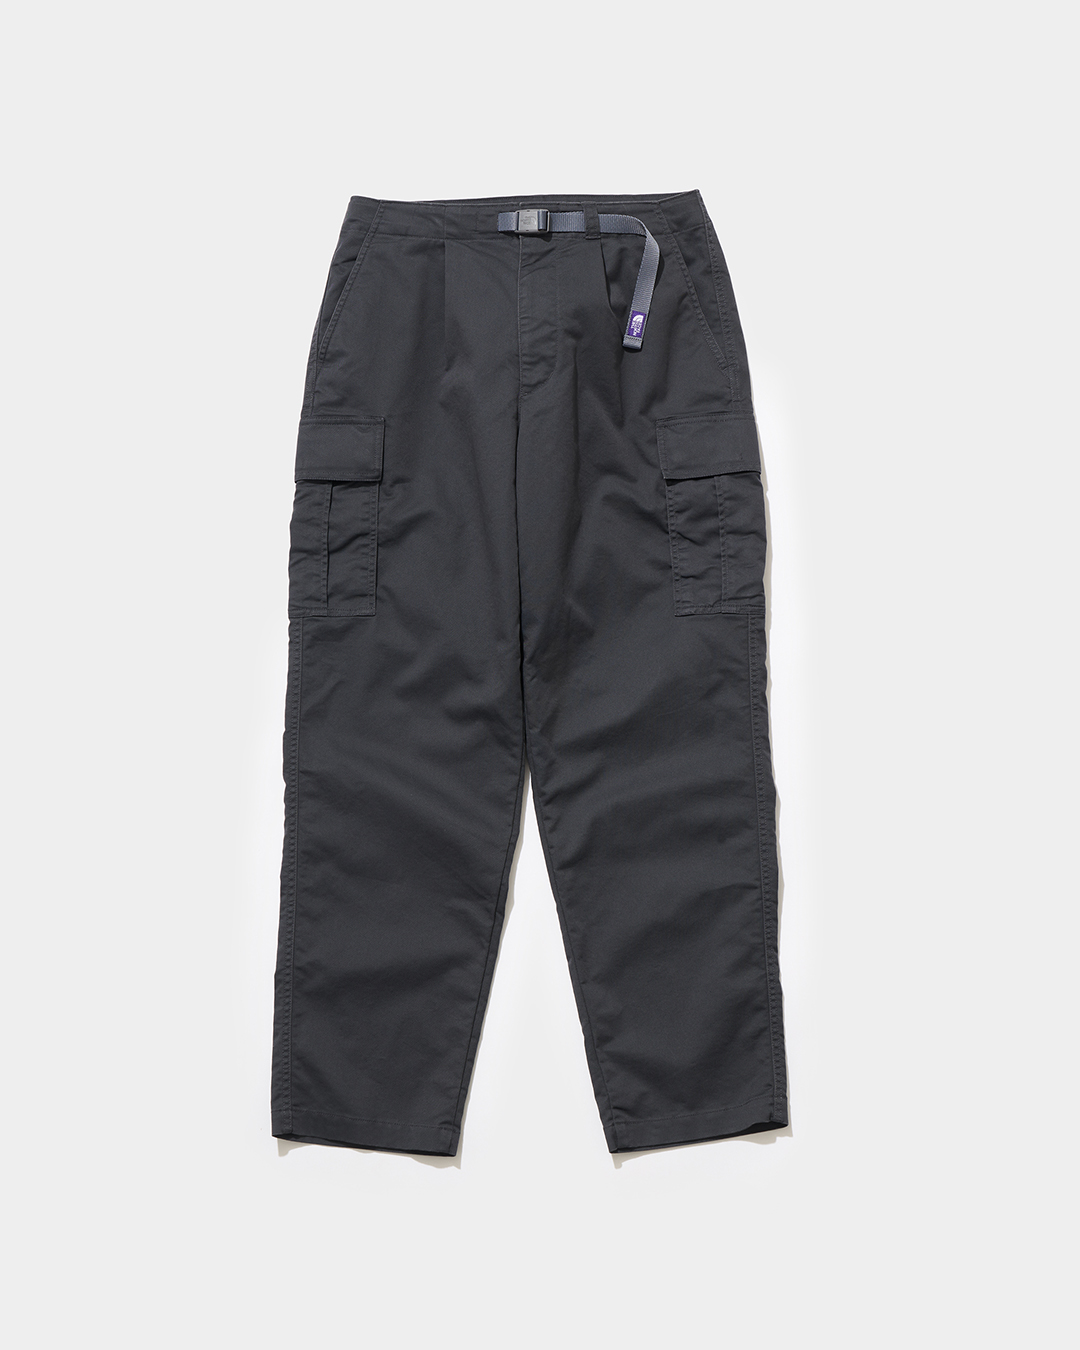 nanamica / THE NORTH FACE PURPLE LABEL / Featured Product vol.21